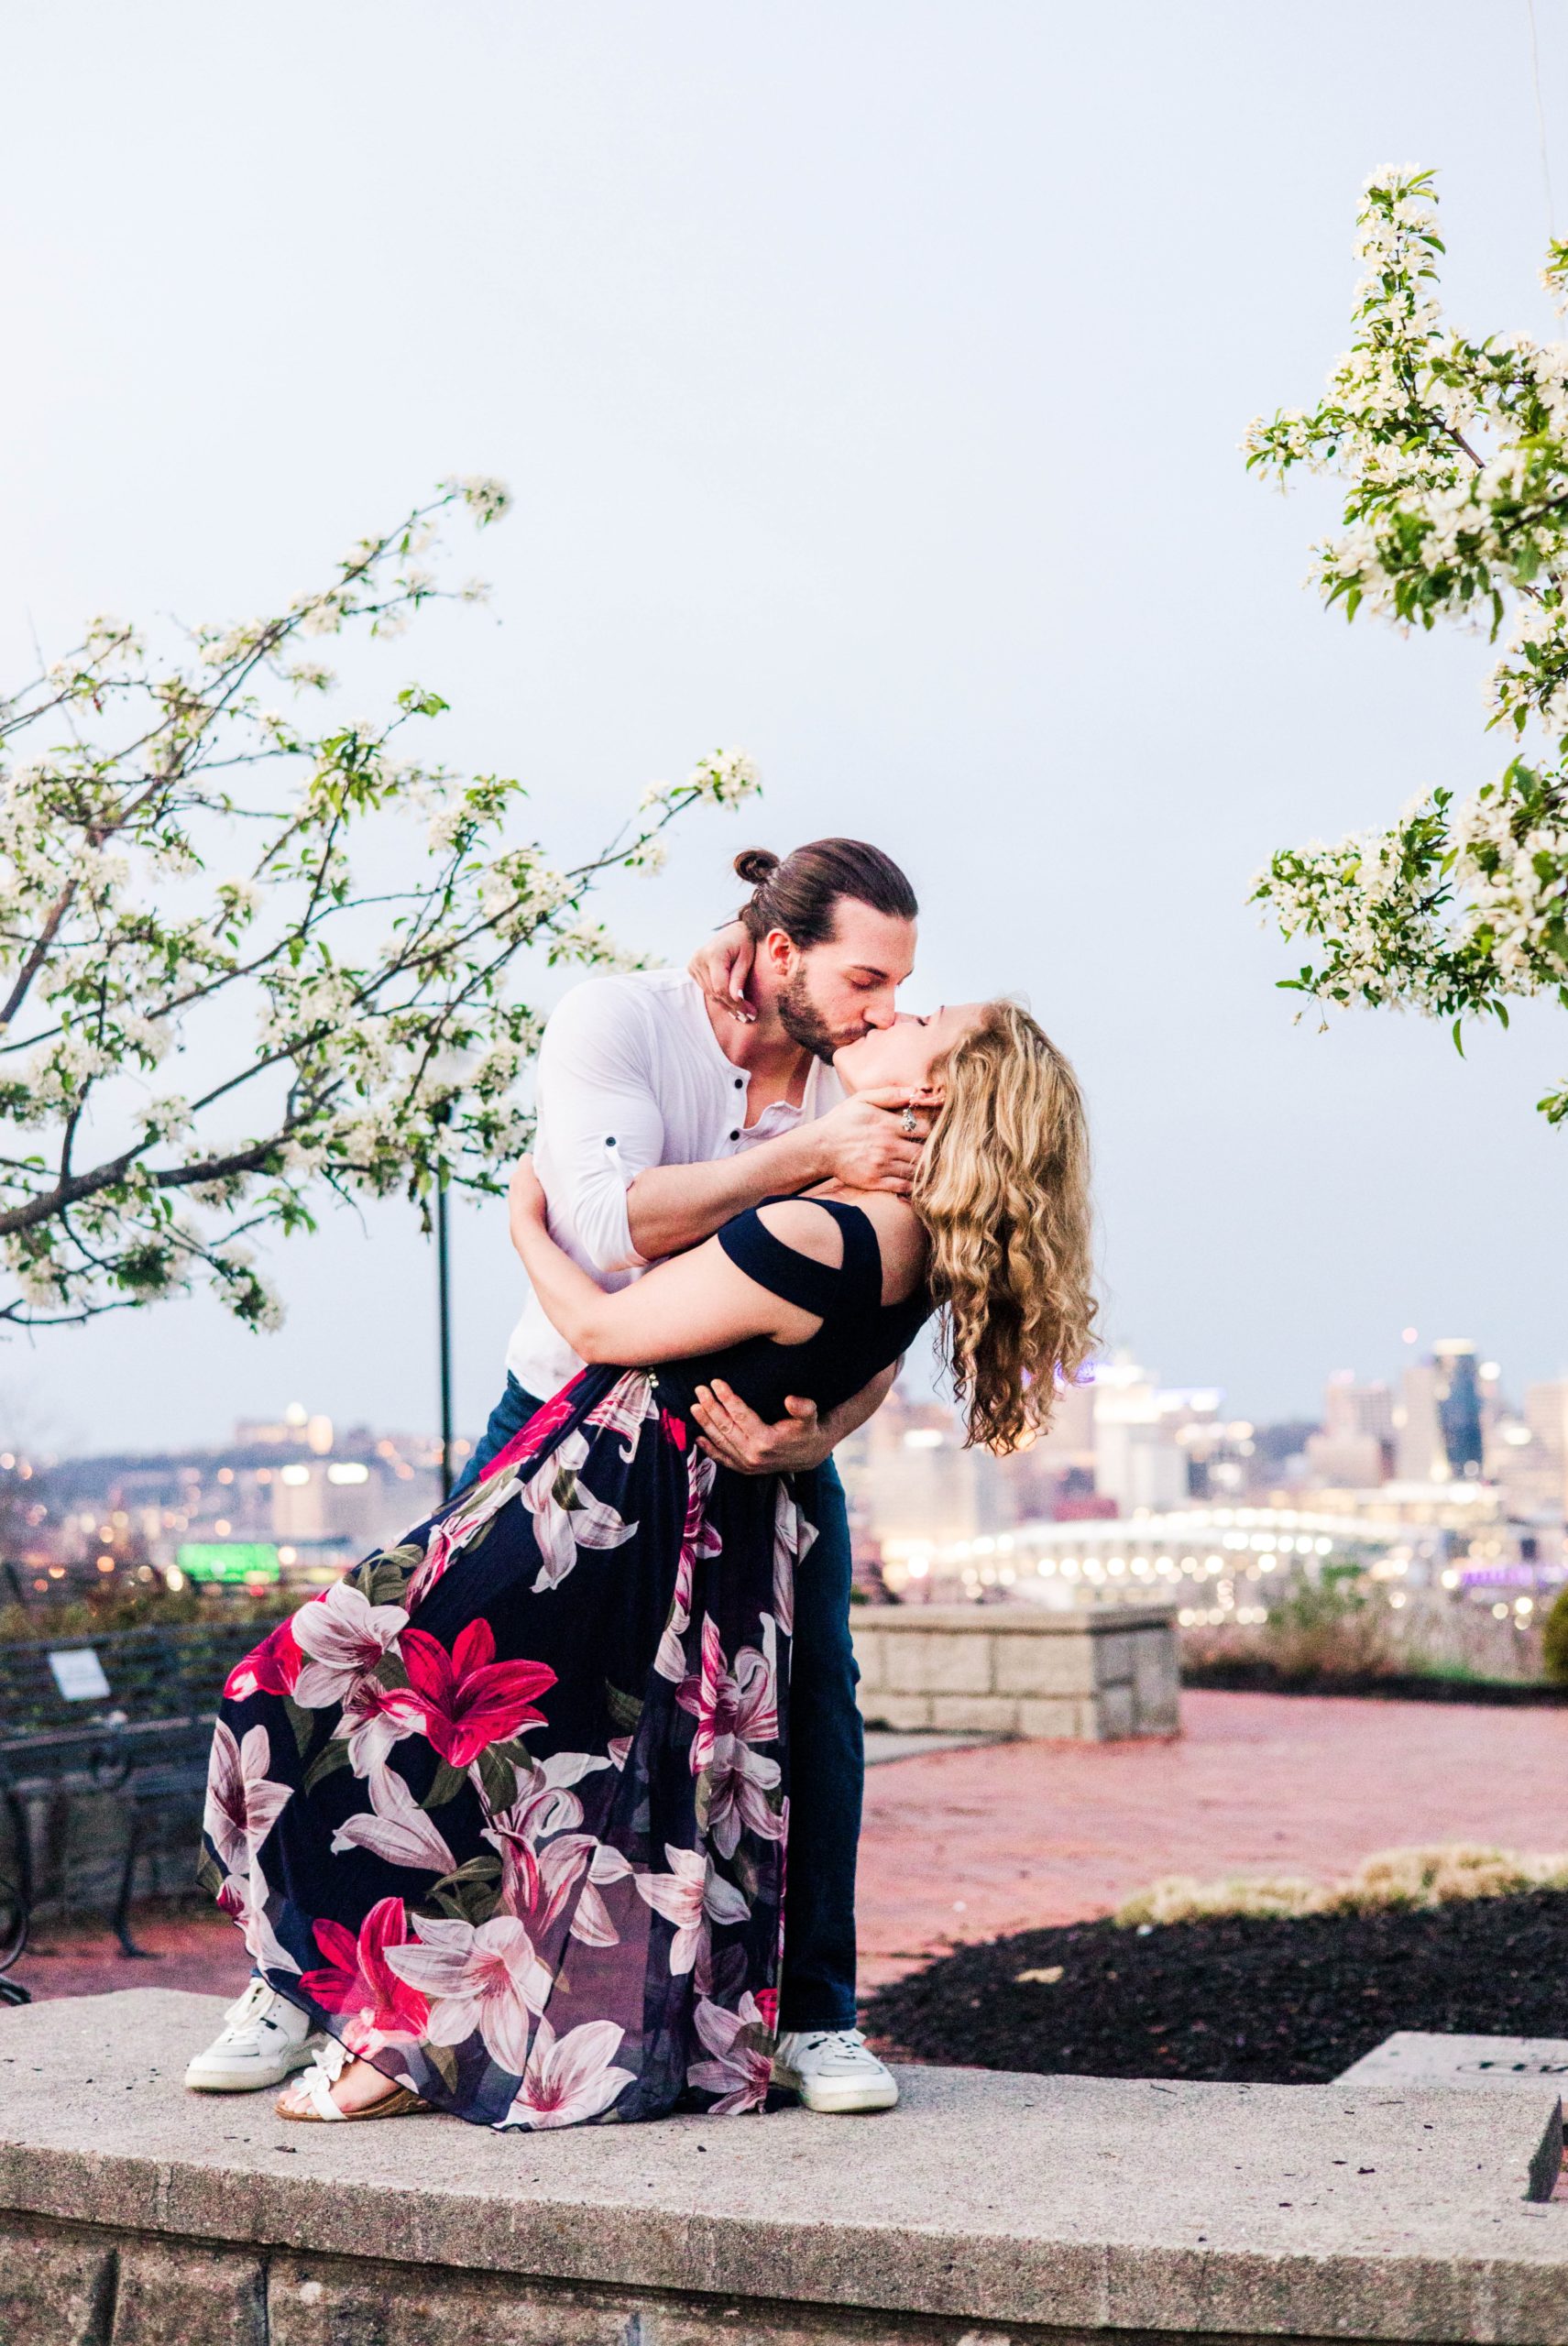 Stacy and Joseph standing on a low wall and kissing with the city in the background during their spring engagement session